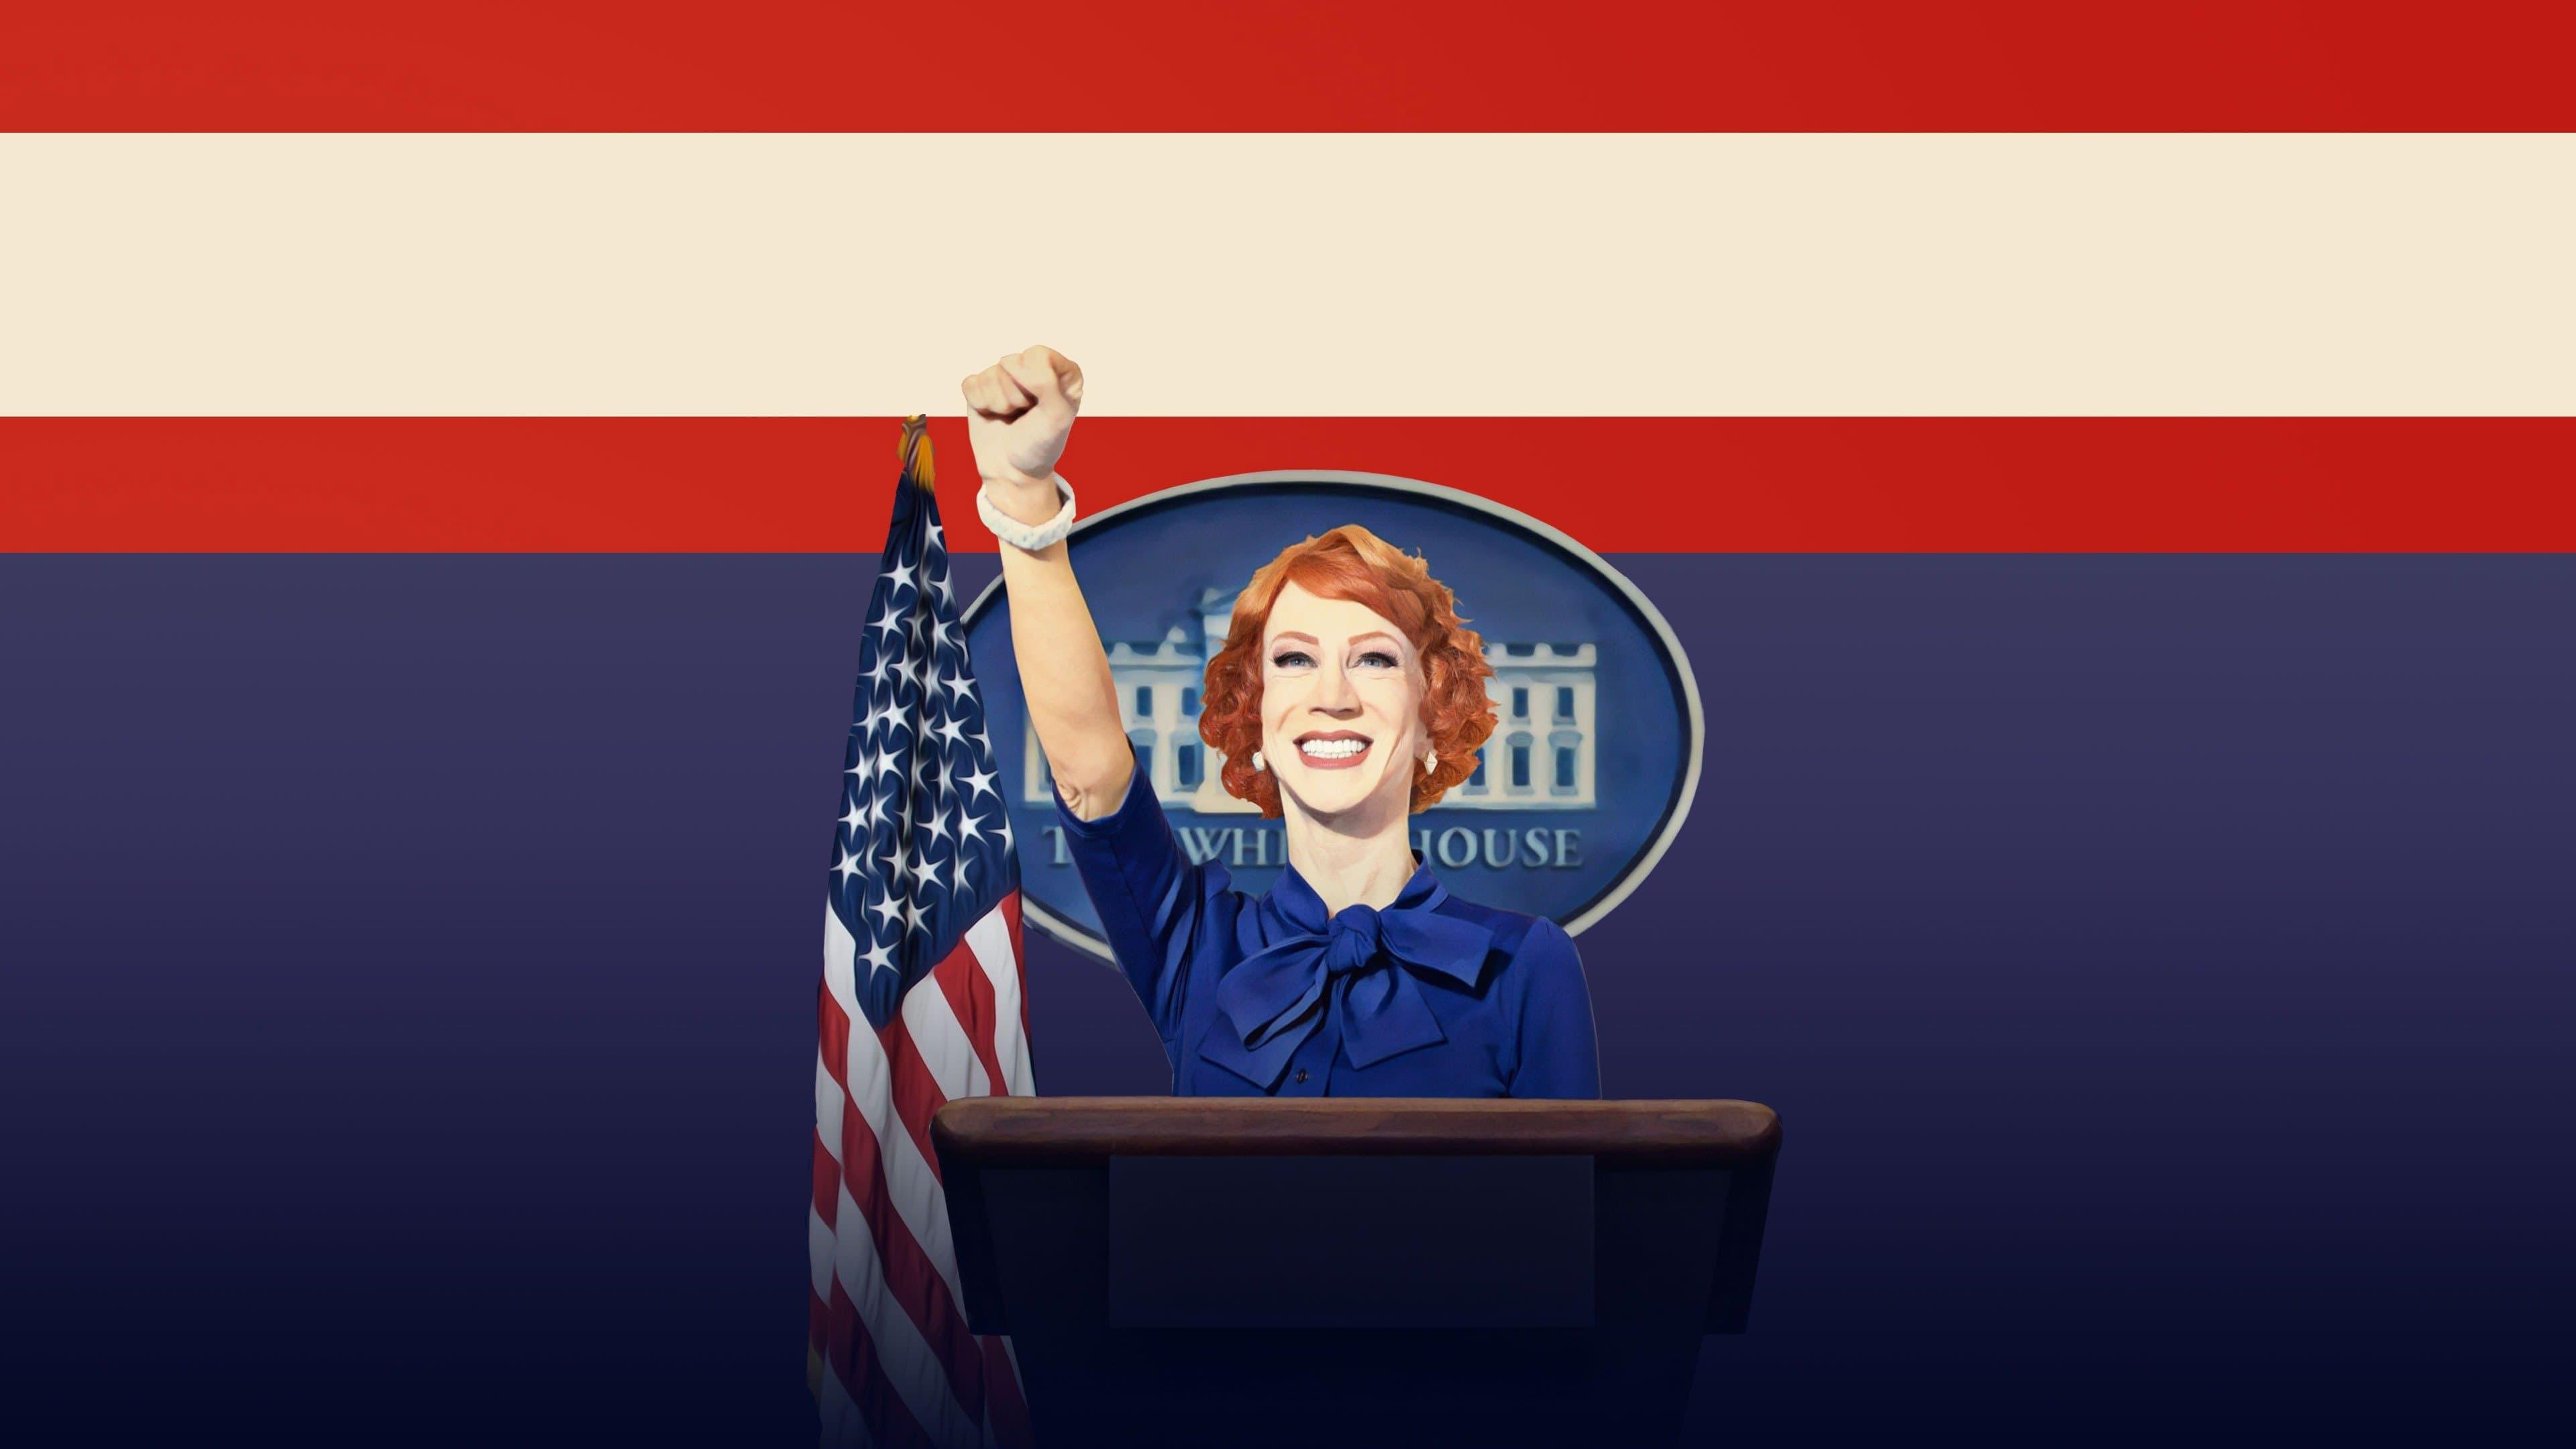 Kathy Griffin: A Hell of a Story backdrop